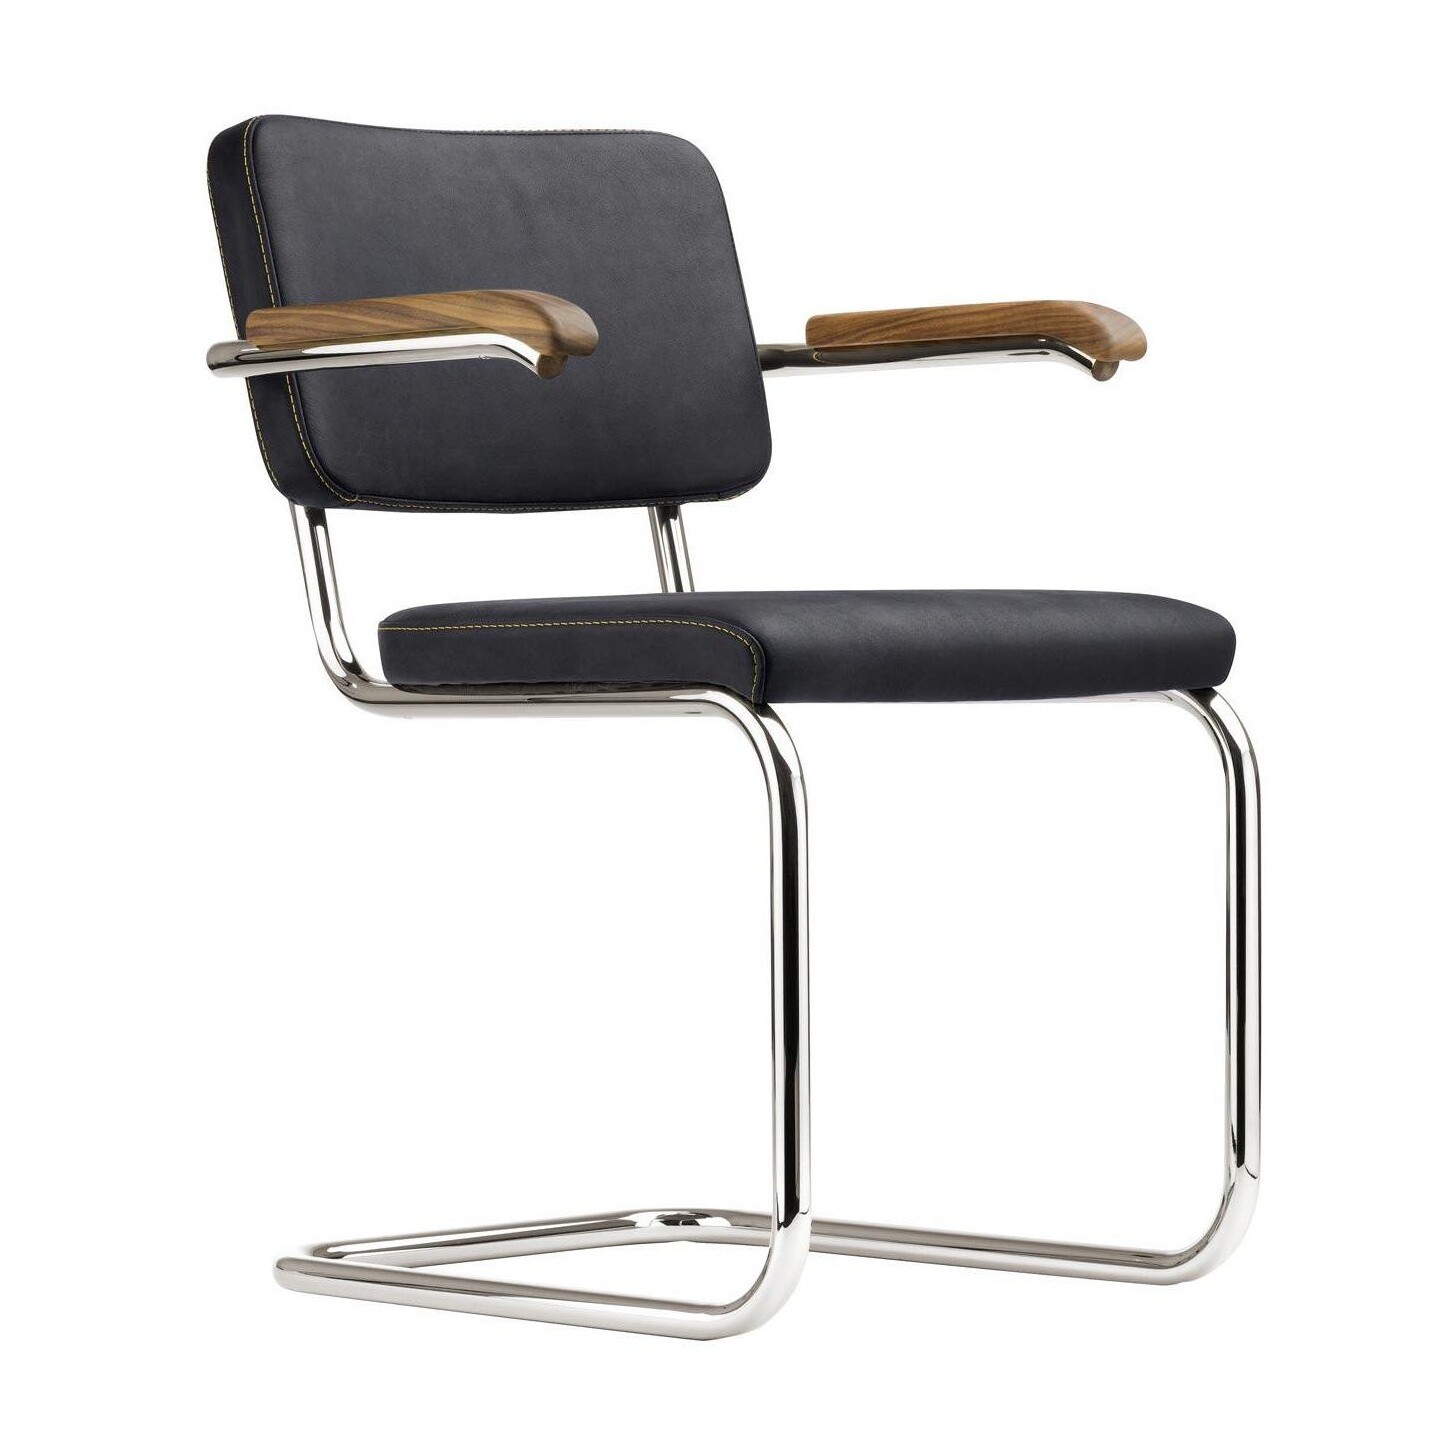 Thonet S 64 Pv Pure Materials Cantilever Armchair Walnut Ambientedirect